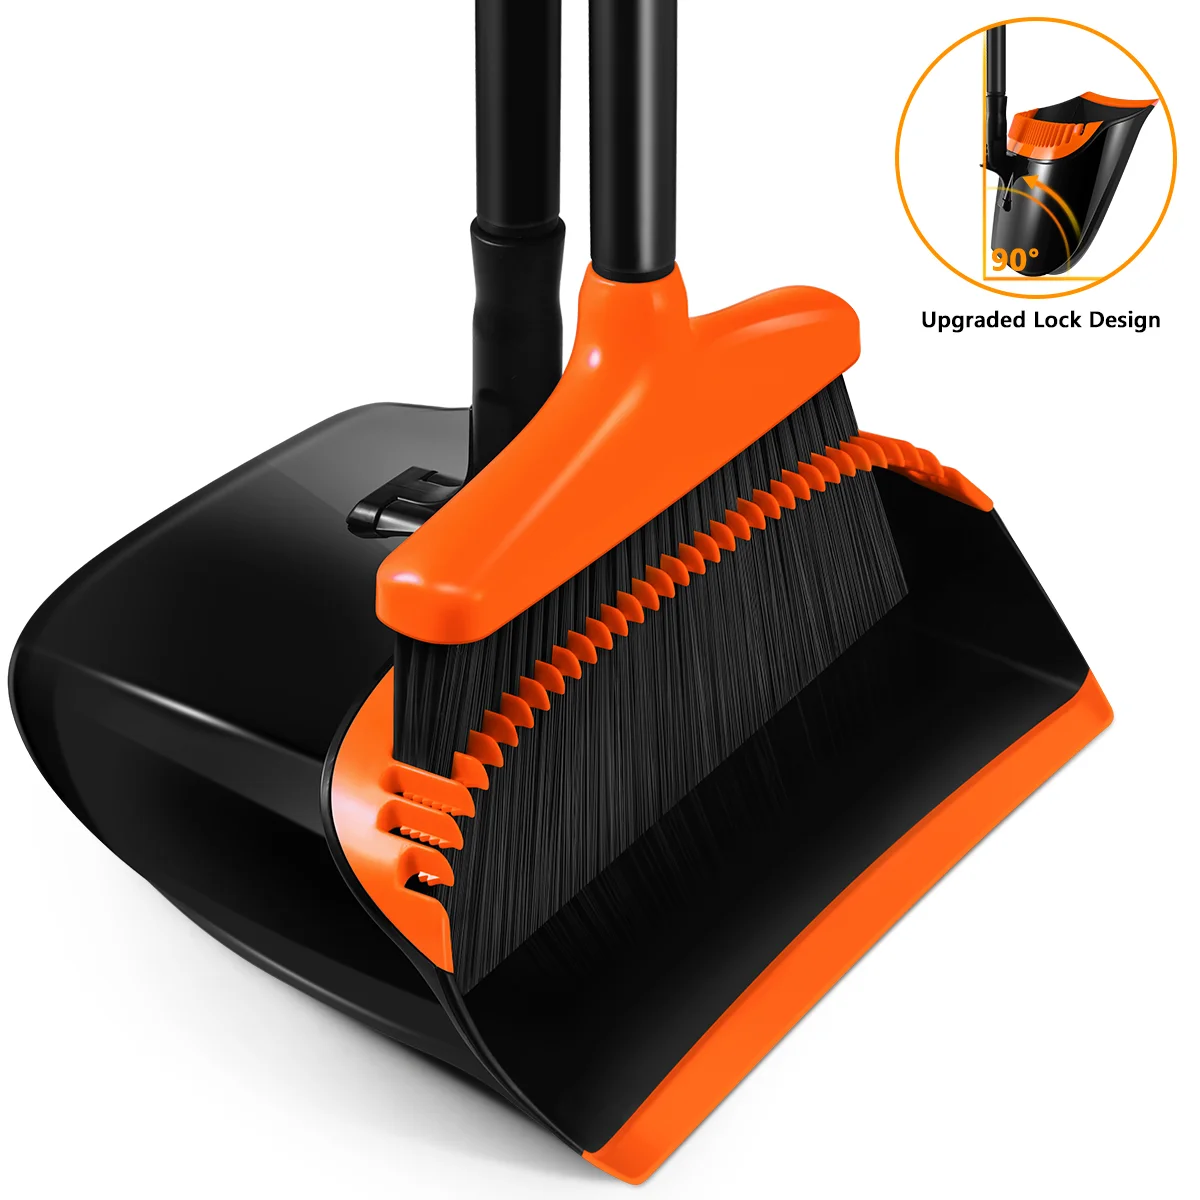 HOMEMAXS Broom and Dustpan Set Extendable Broomstick and Dust Pan for Home Kitchen Room Office (Black and Orange)